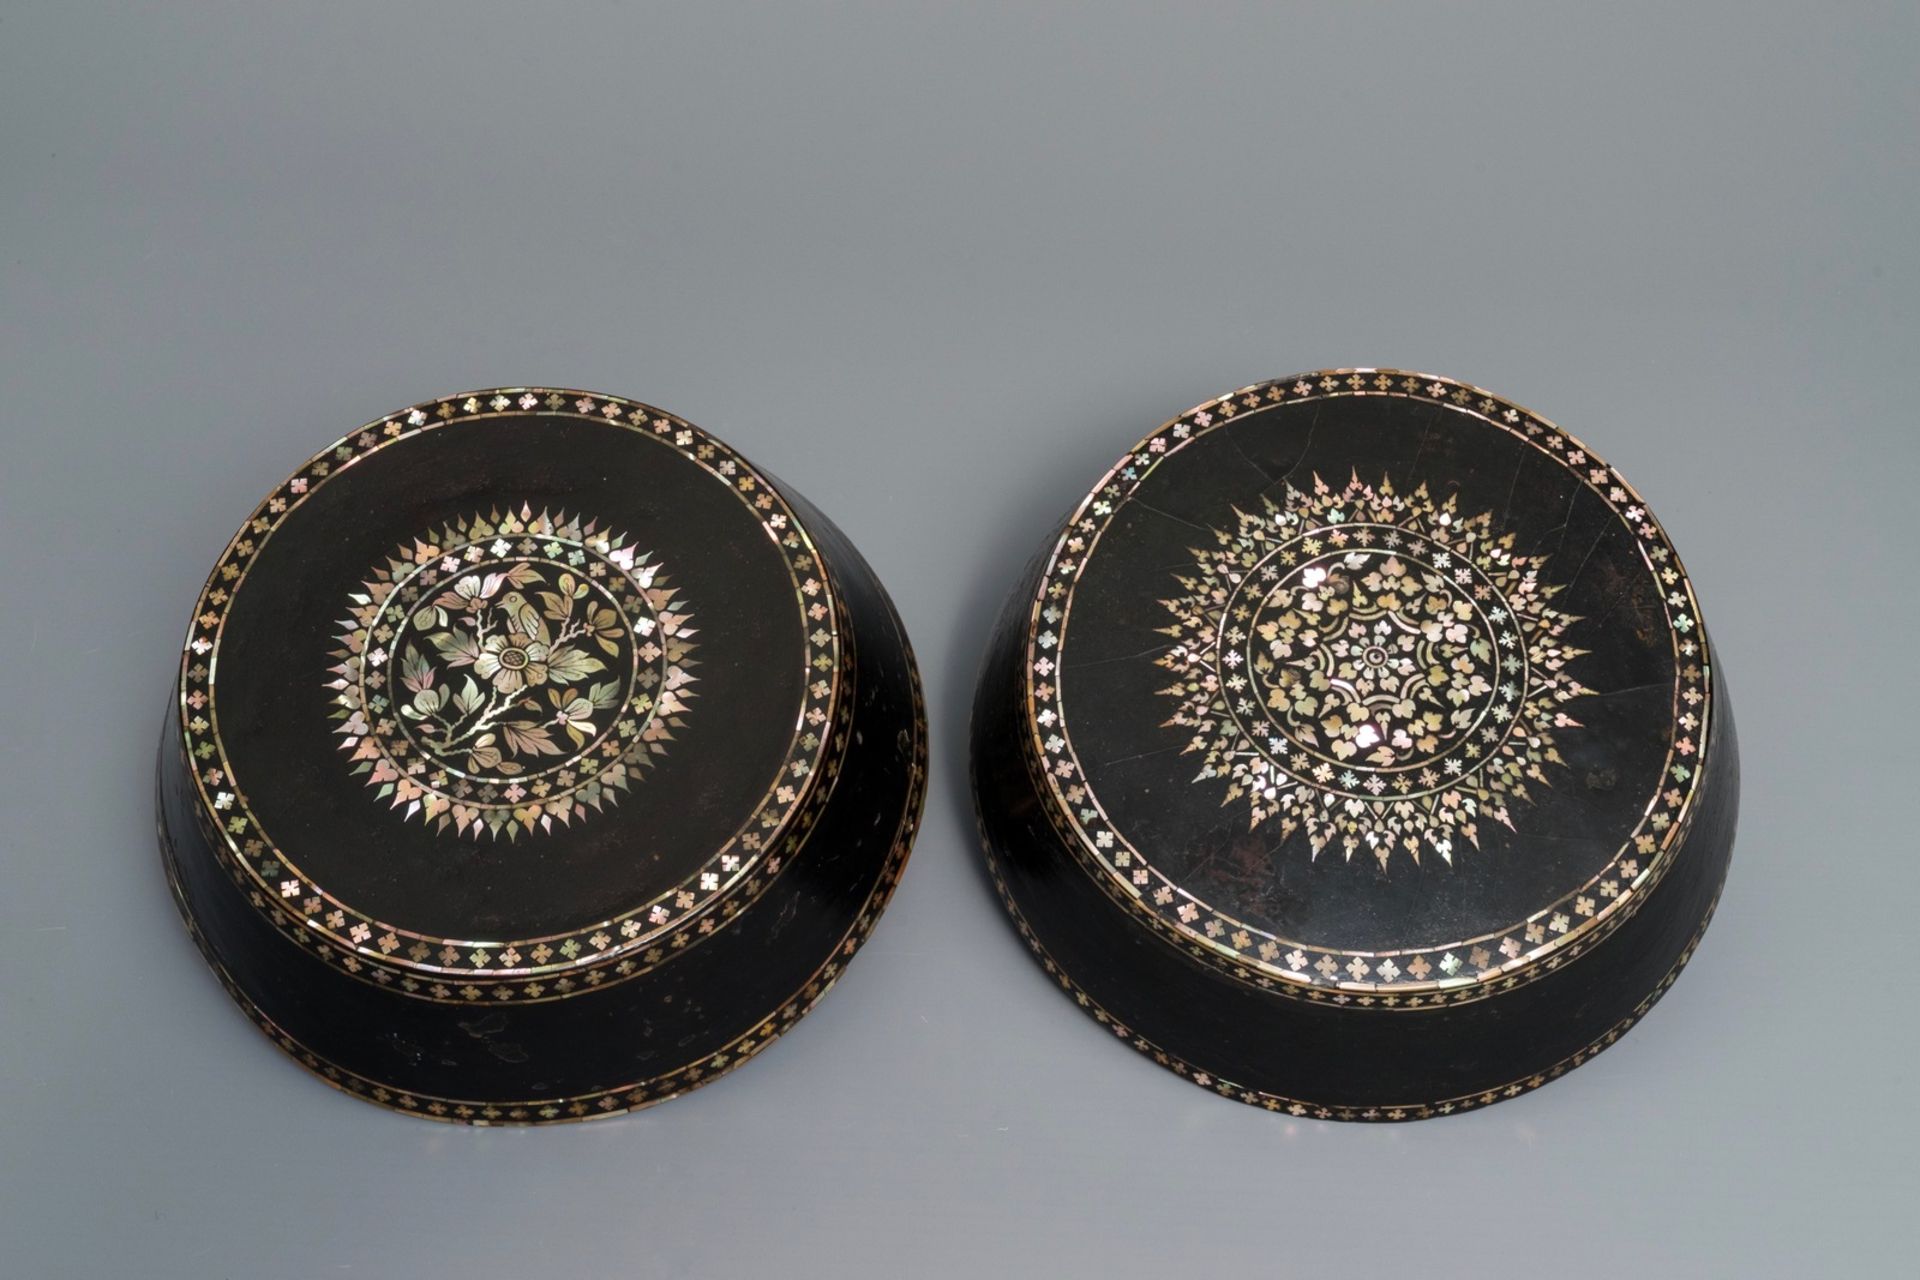 A varied collection of mother-of-pearl and mica-inlaid lacquerware, Southeast Asia, 19/20th C. - Image 10 of 10